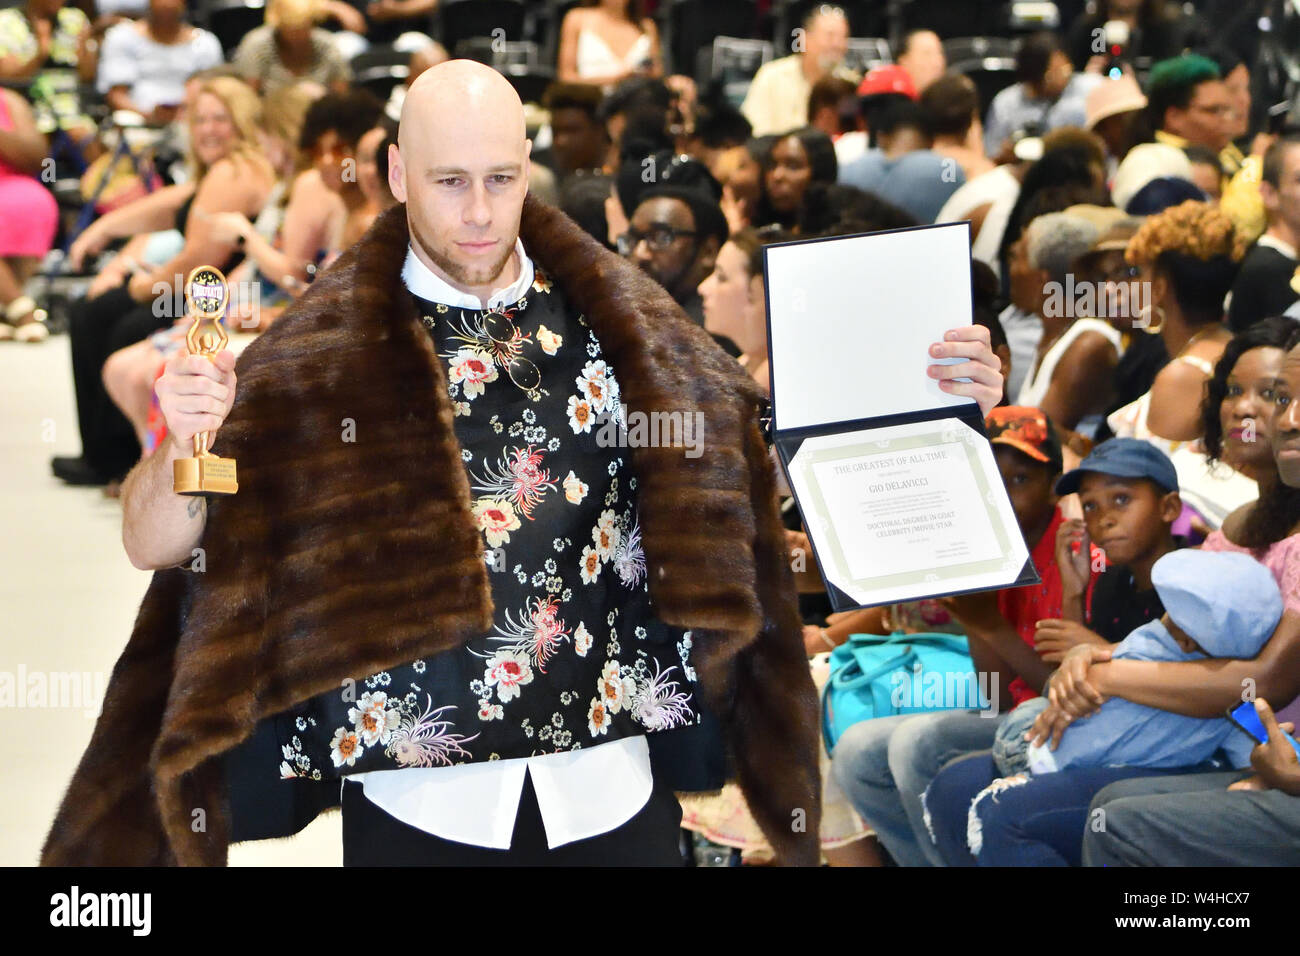 SuperModel Gio Delavicci shows off his GOAT (Greatest of All Time Award) at the Fashion on the Hudson show (2583) Stock Photo